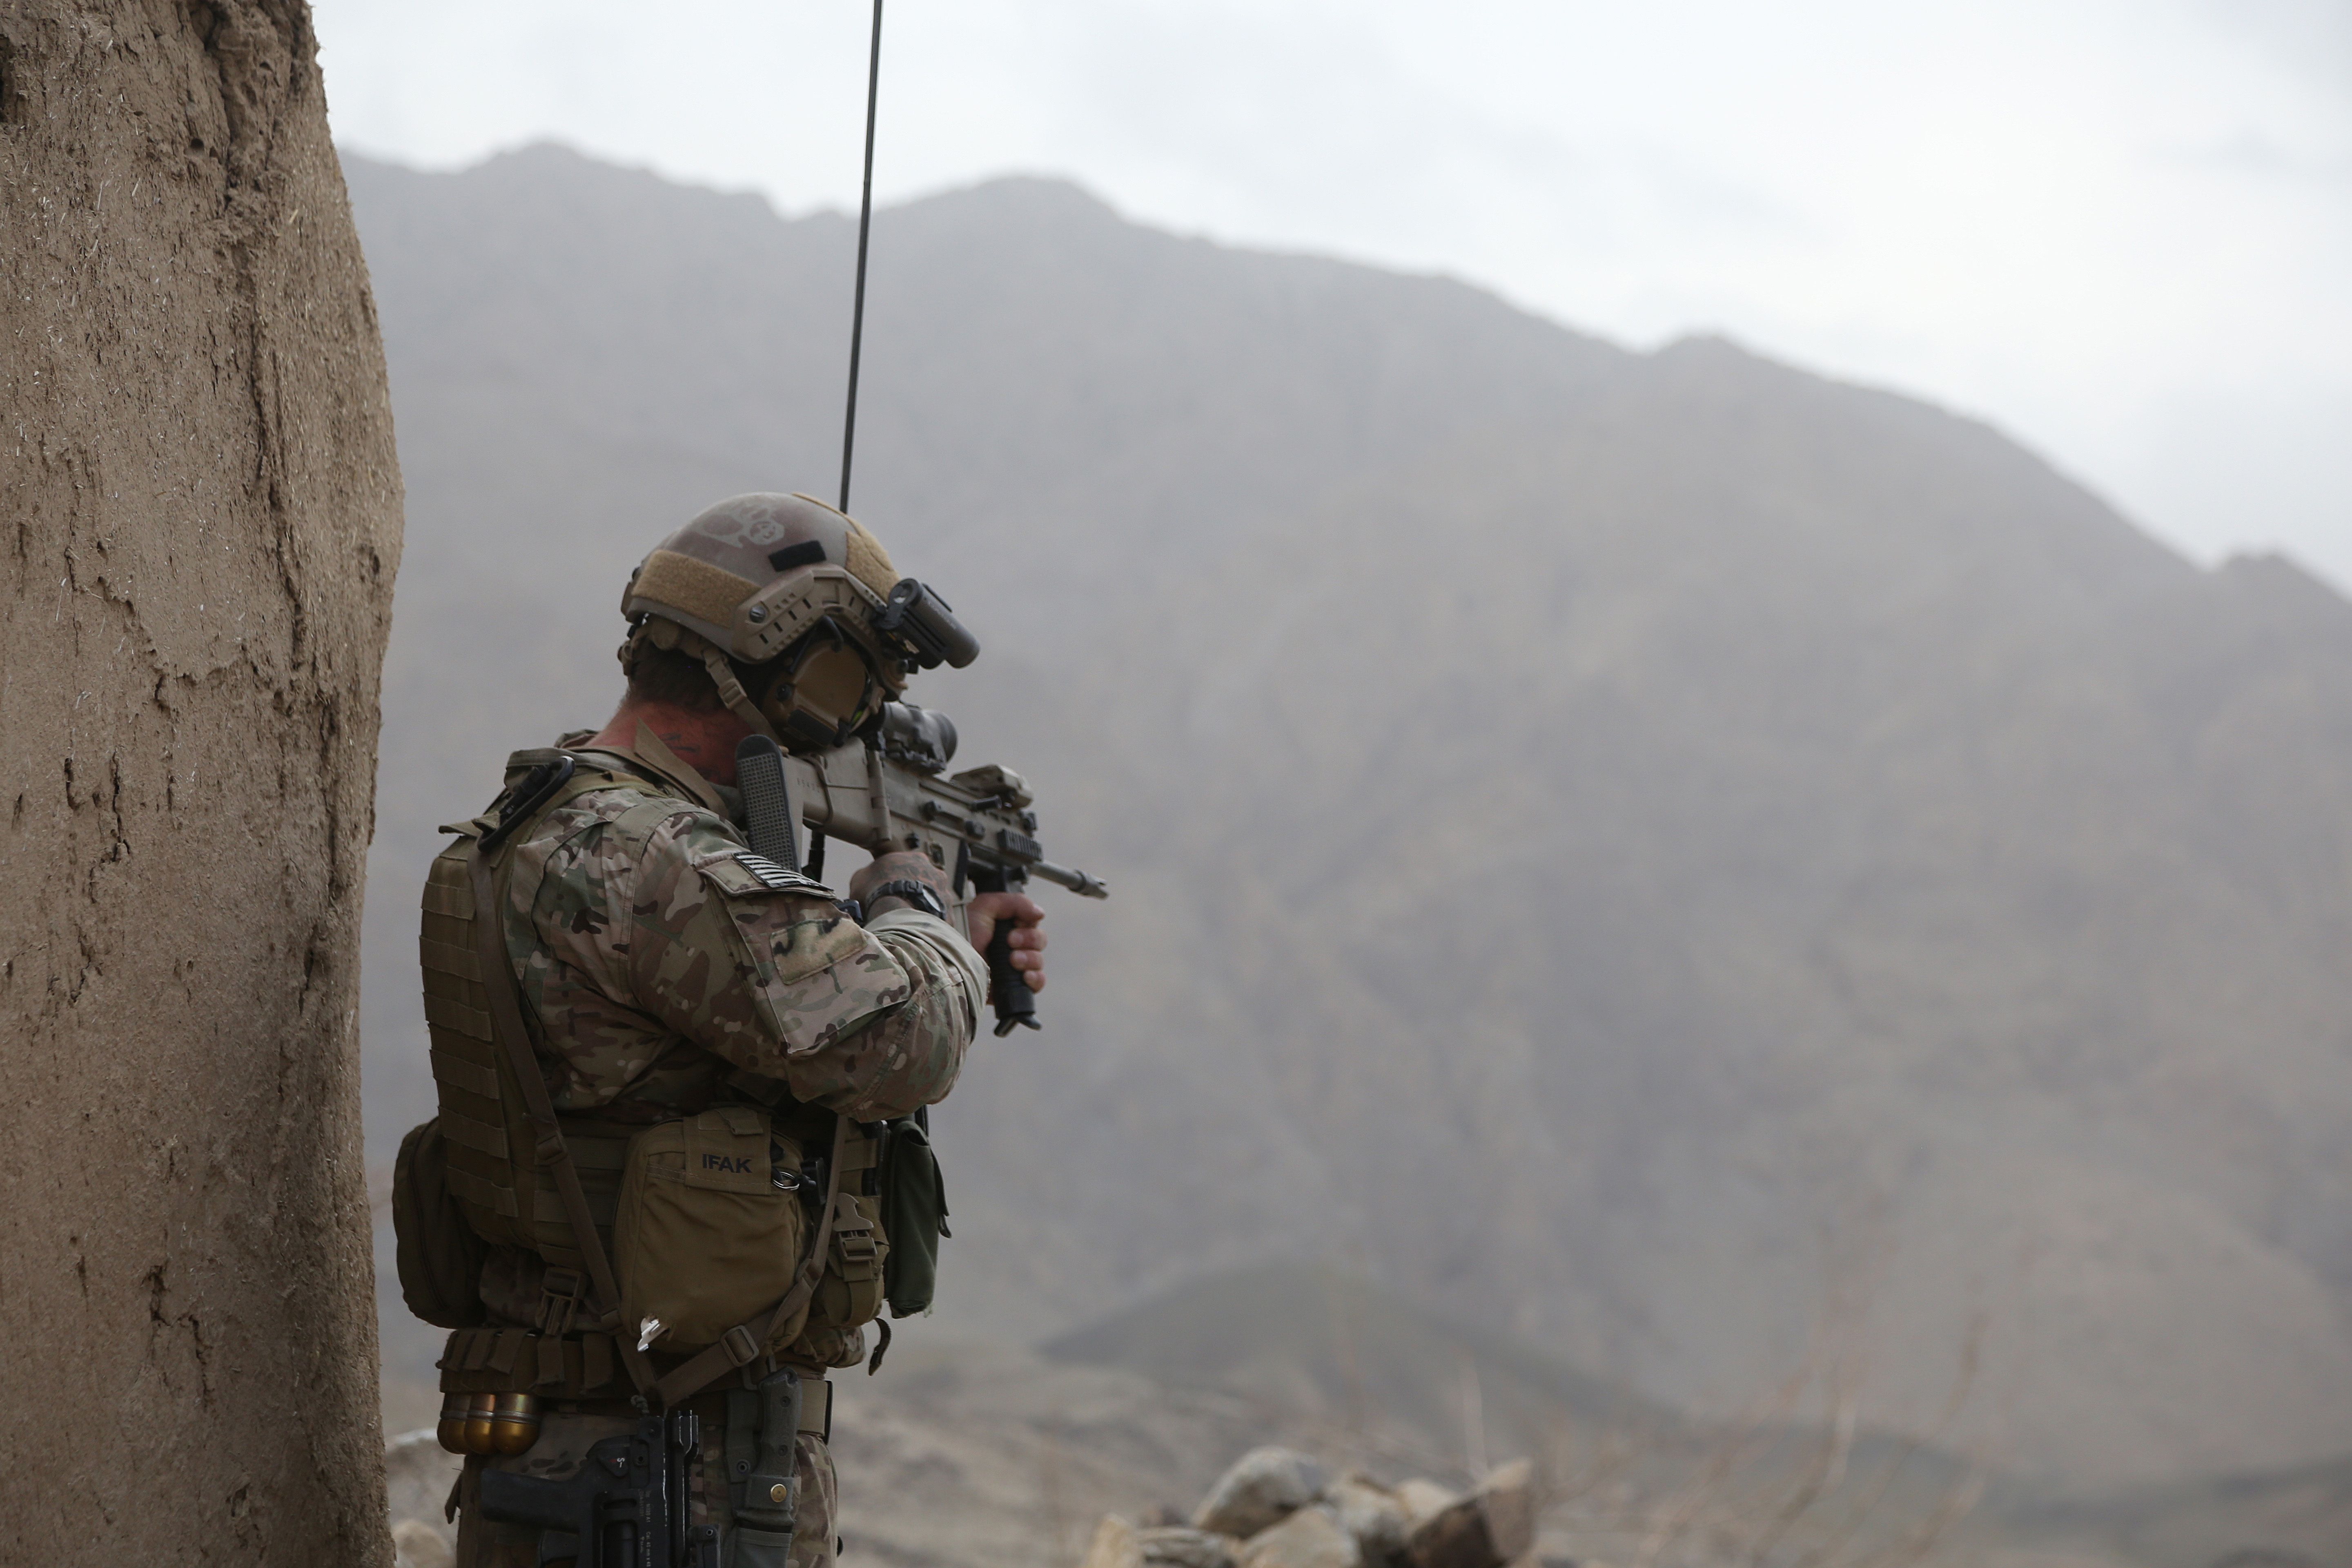 Special Forces face increased cyber risks, challenges